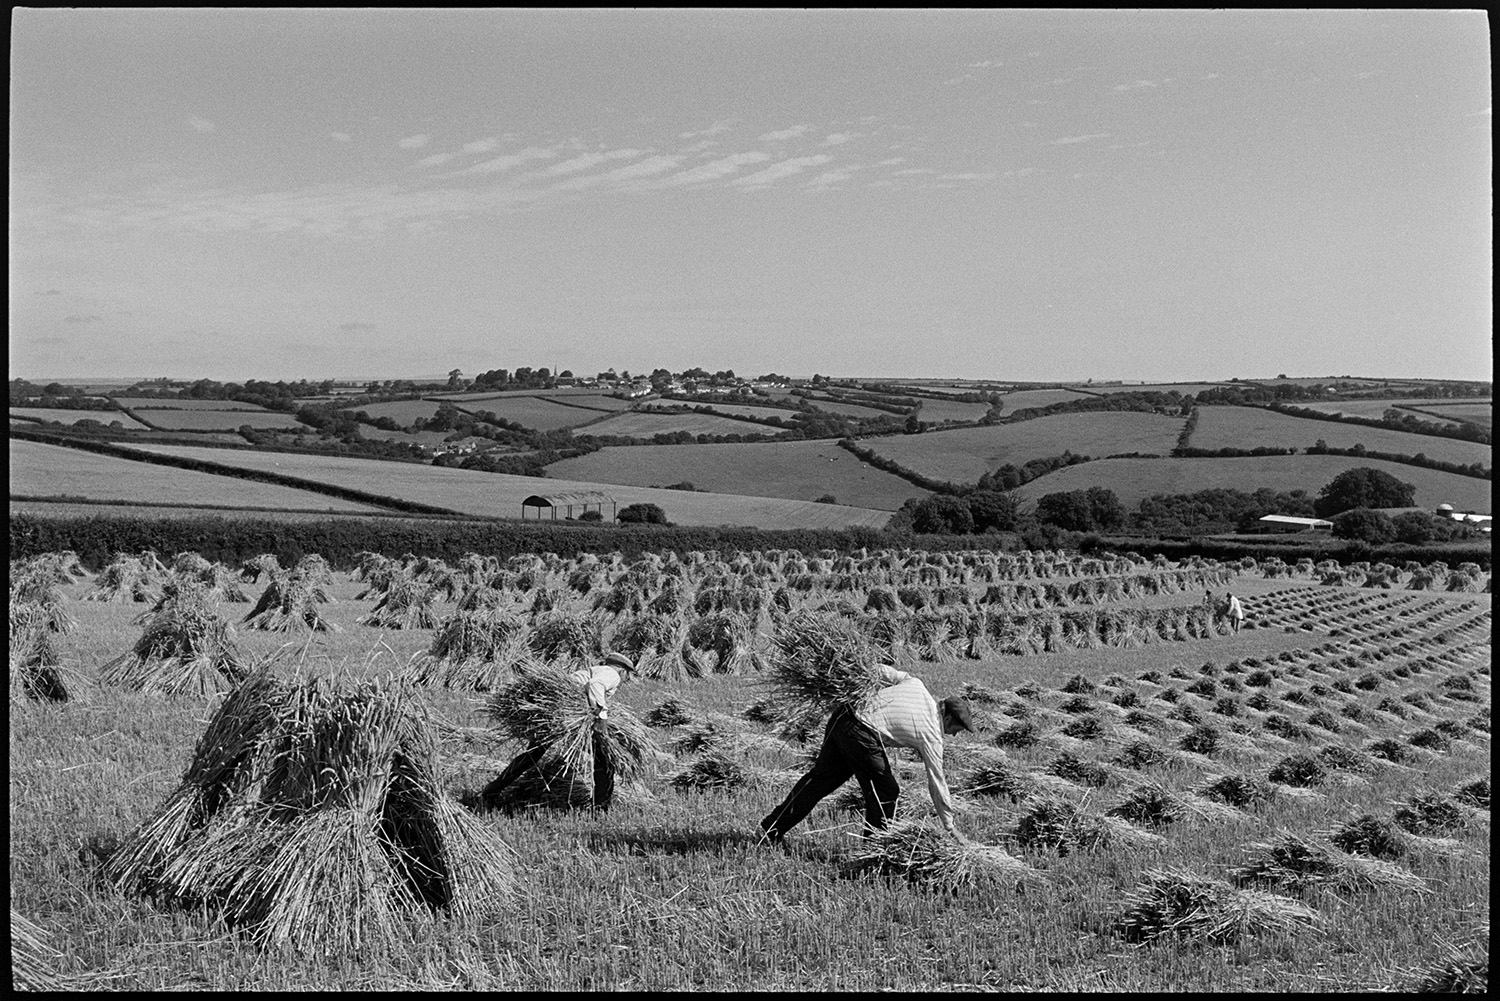 Men setting up stooks.
[Four men, including Mr Down, setting up stooks of corn in a field at Spittle, Chulmleigh, with a view of surrounding fields, hedgerows and a barn in the background.]